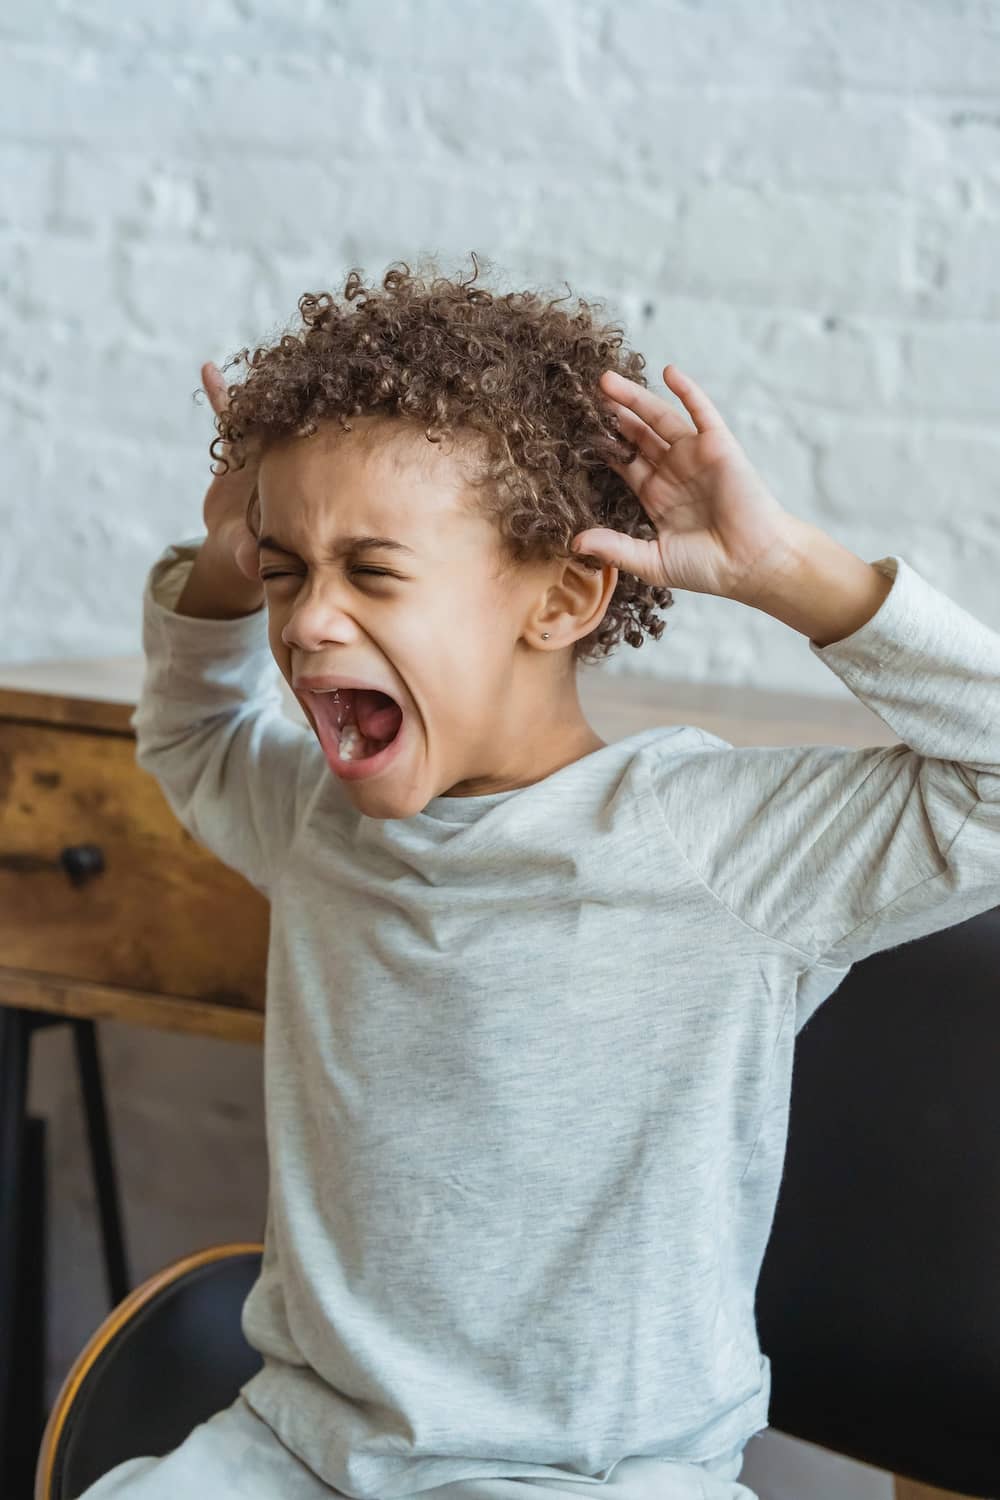 how to deal with temper tantrums